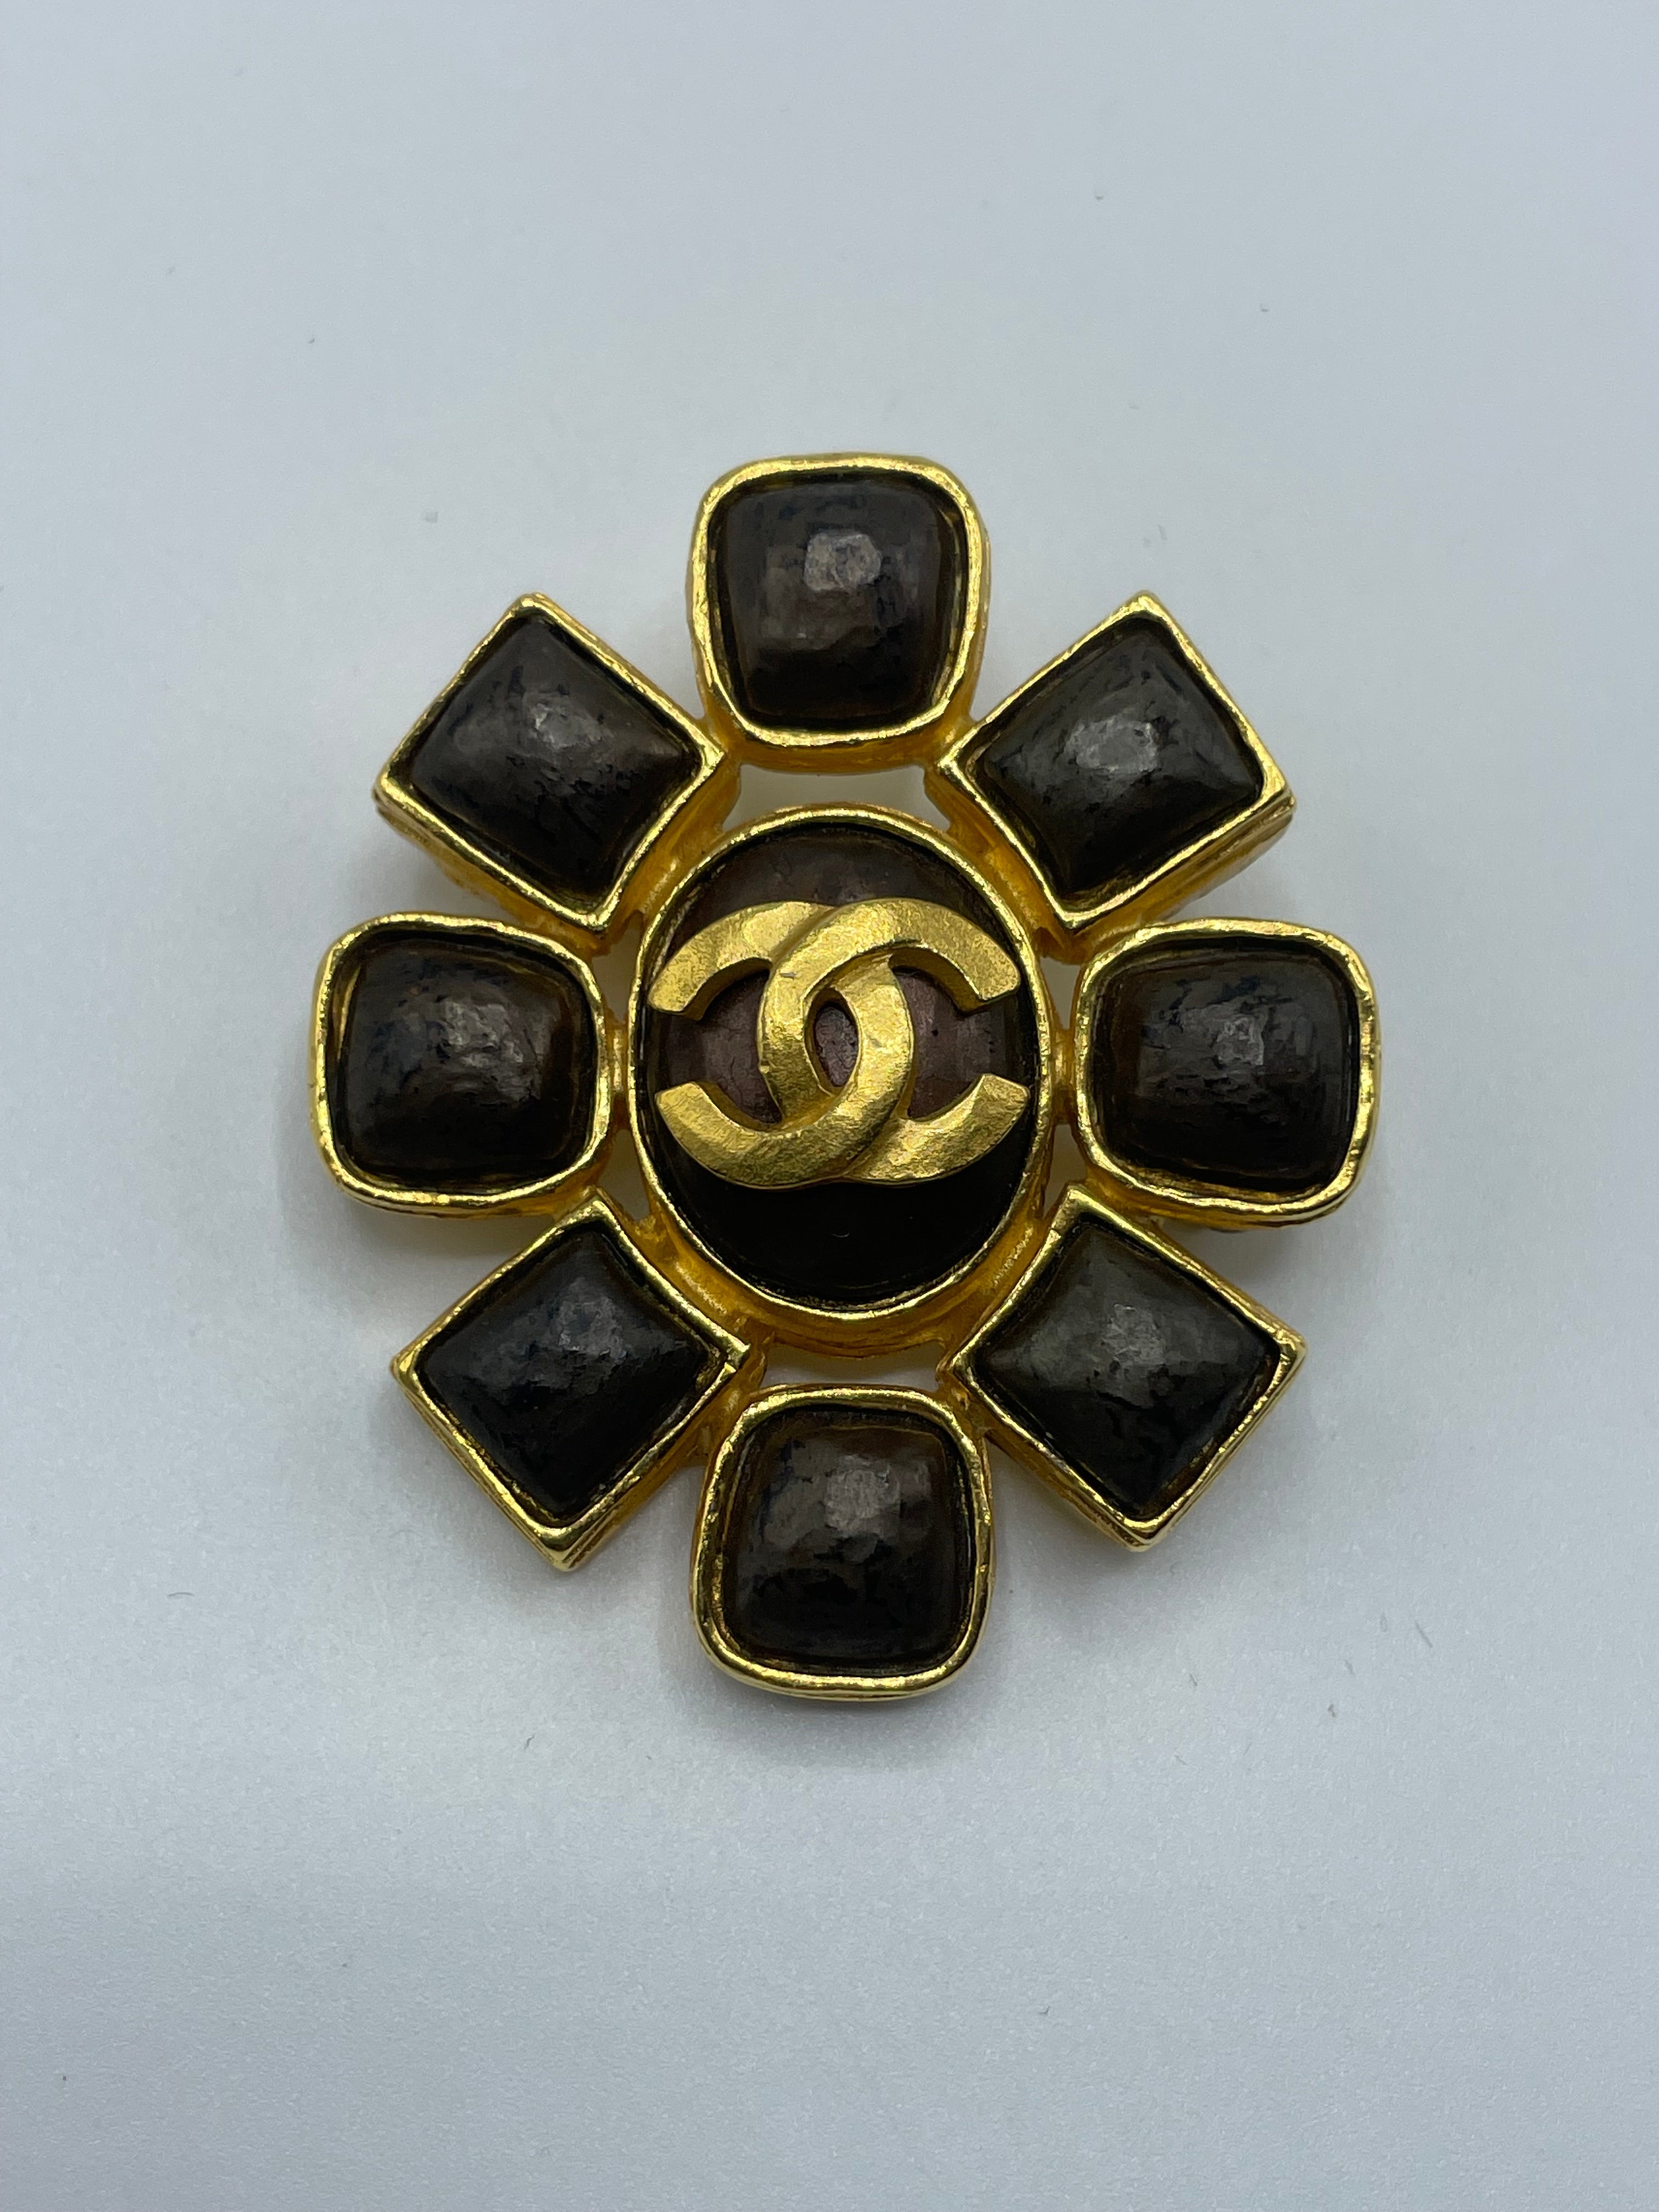 Chanel brooch from the 1997 gold plated. In wonderful vintage condition, with a large CC in the center and a plethora of round and square shapes surrounding it. Signed Chanel on the reverse. Made in France . 